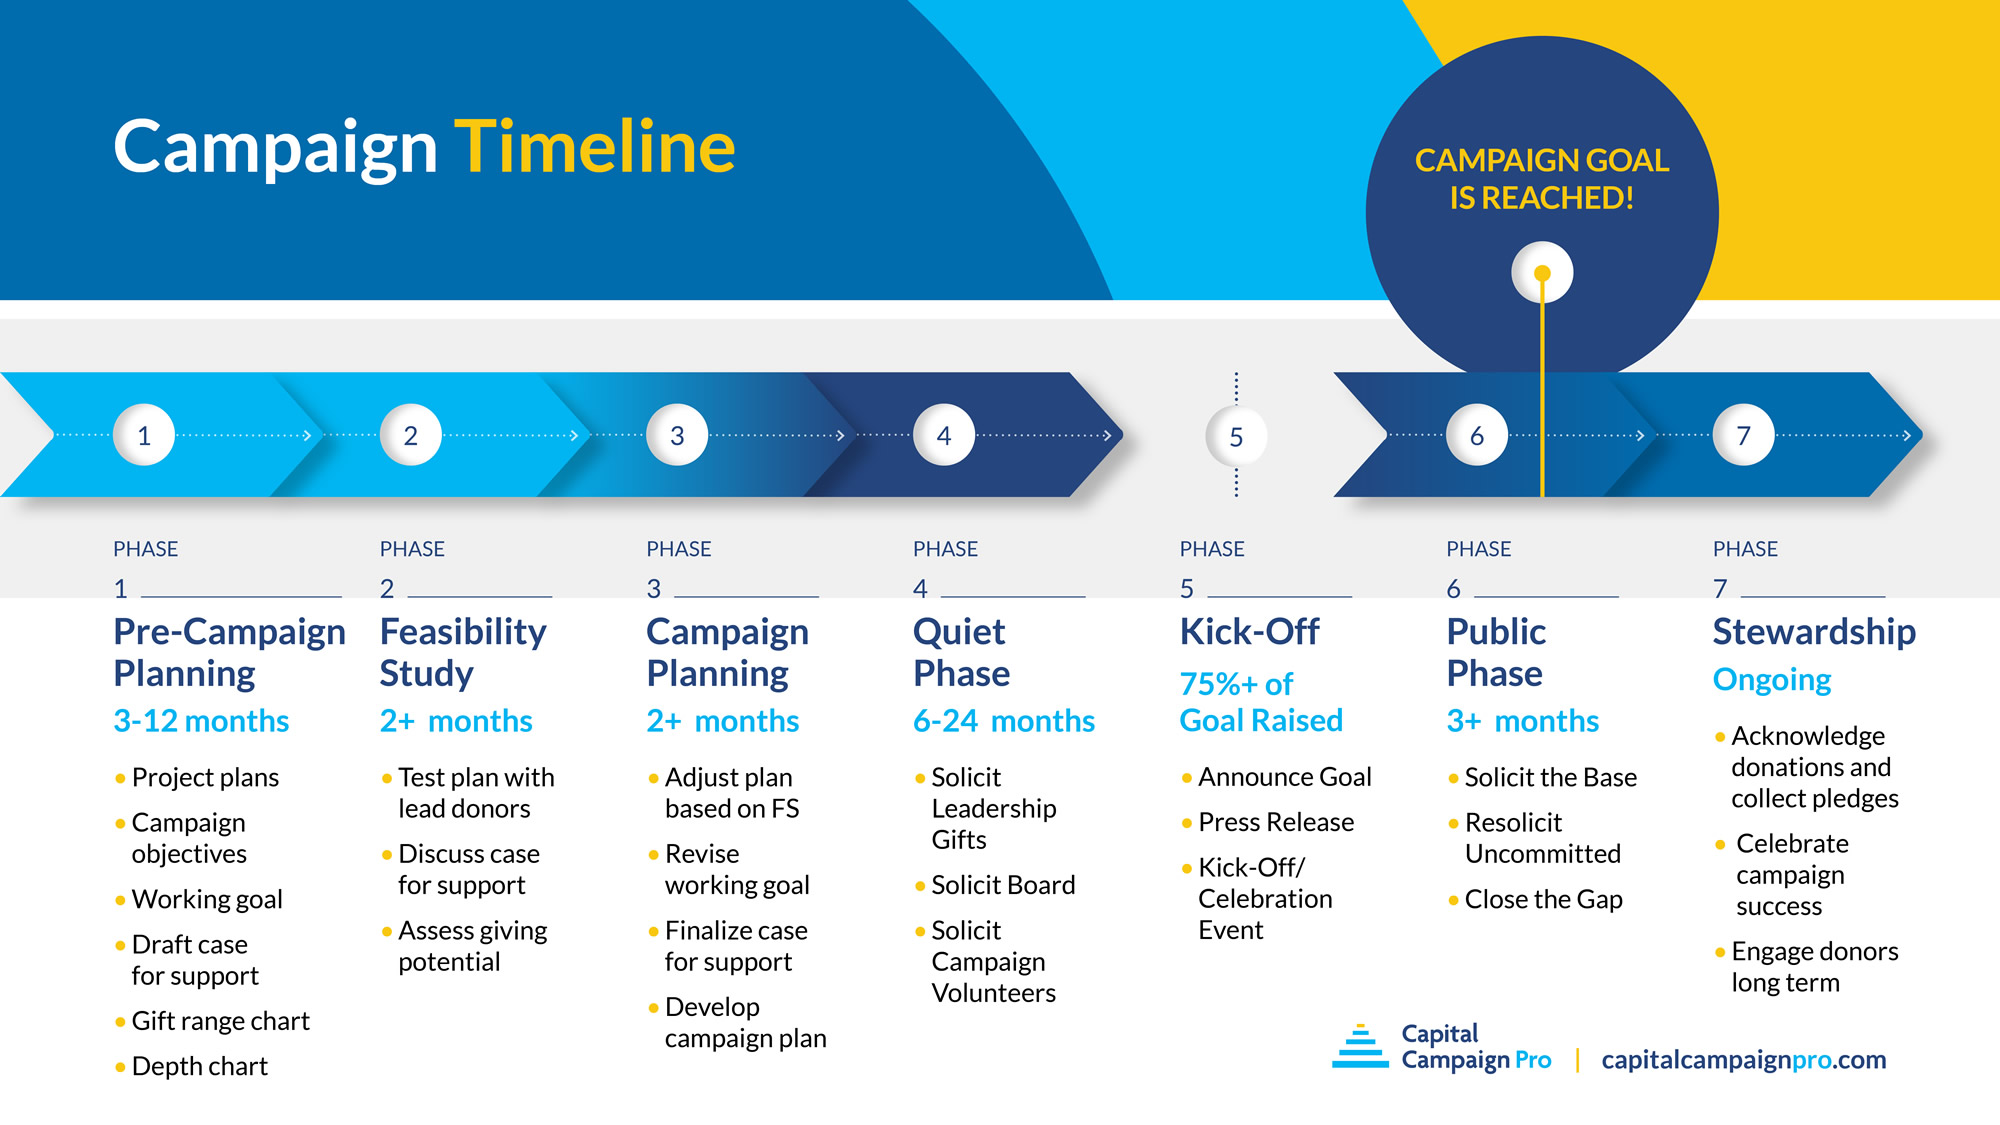 Your capital campaign timeline should include the seven phases shown here